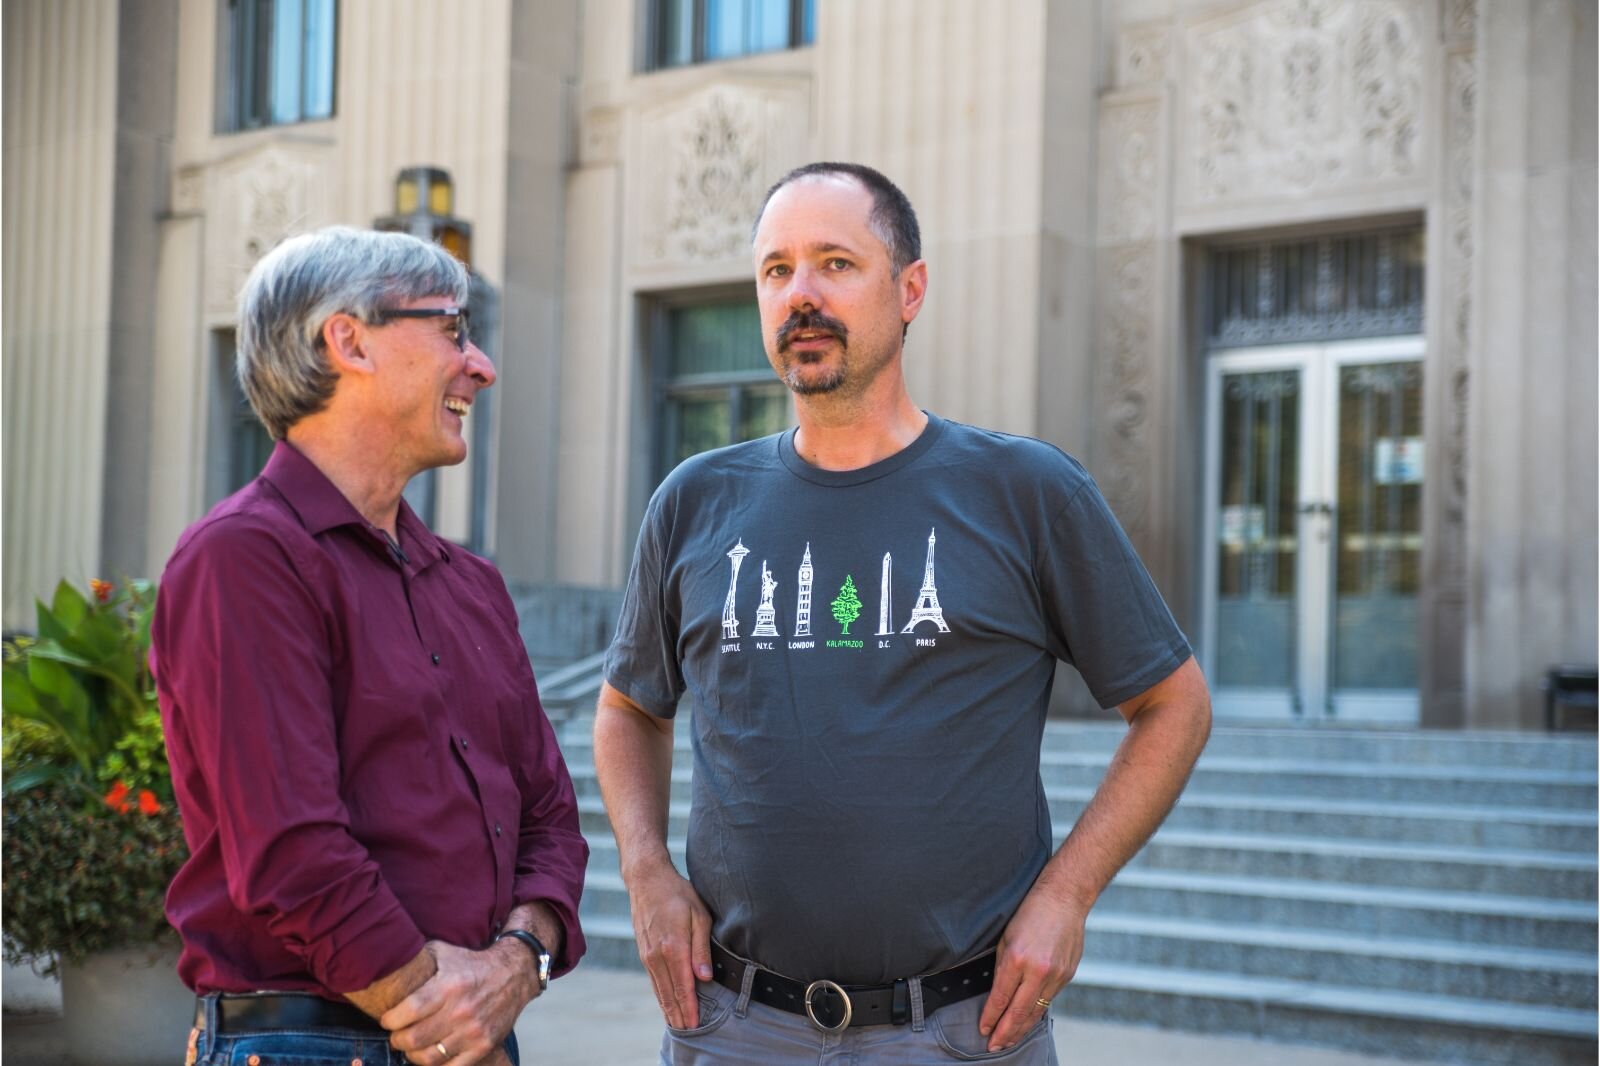 WMU professor Paul Clements and Jeff Spoelstra (Elliot's father) chat near the steps of City Hall.